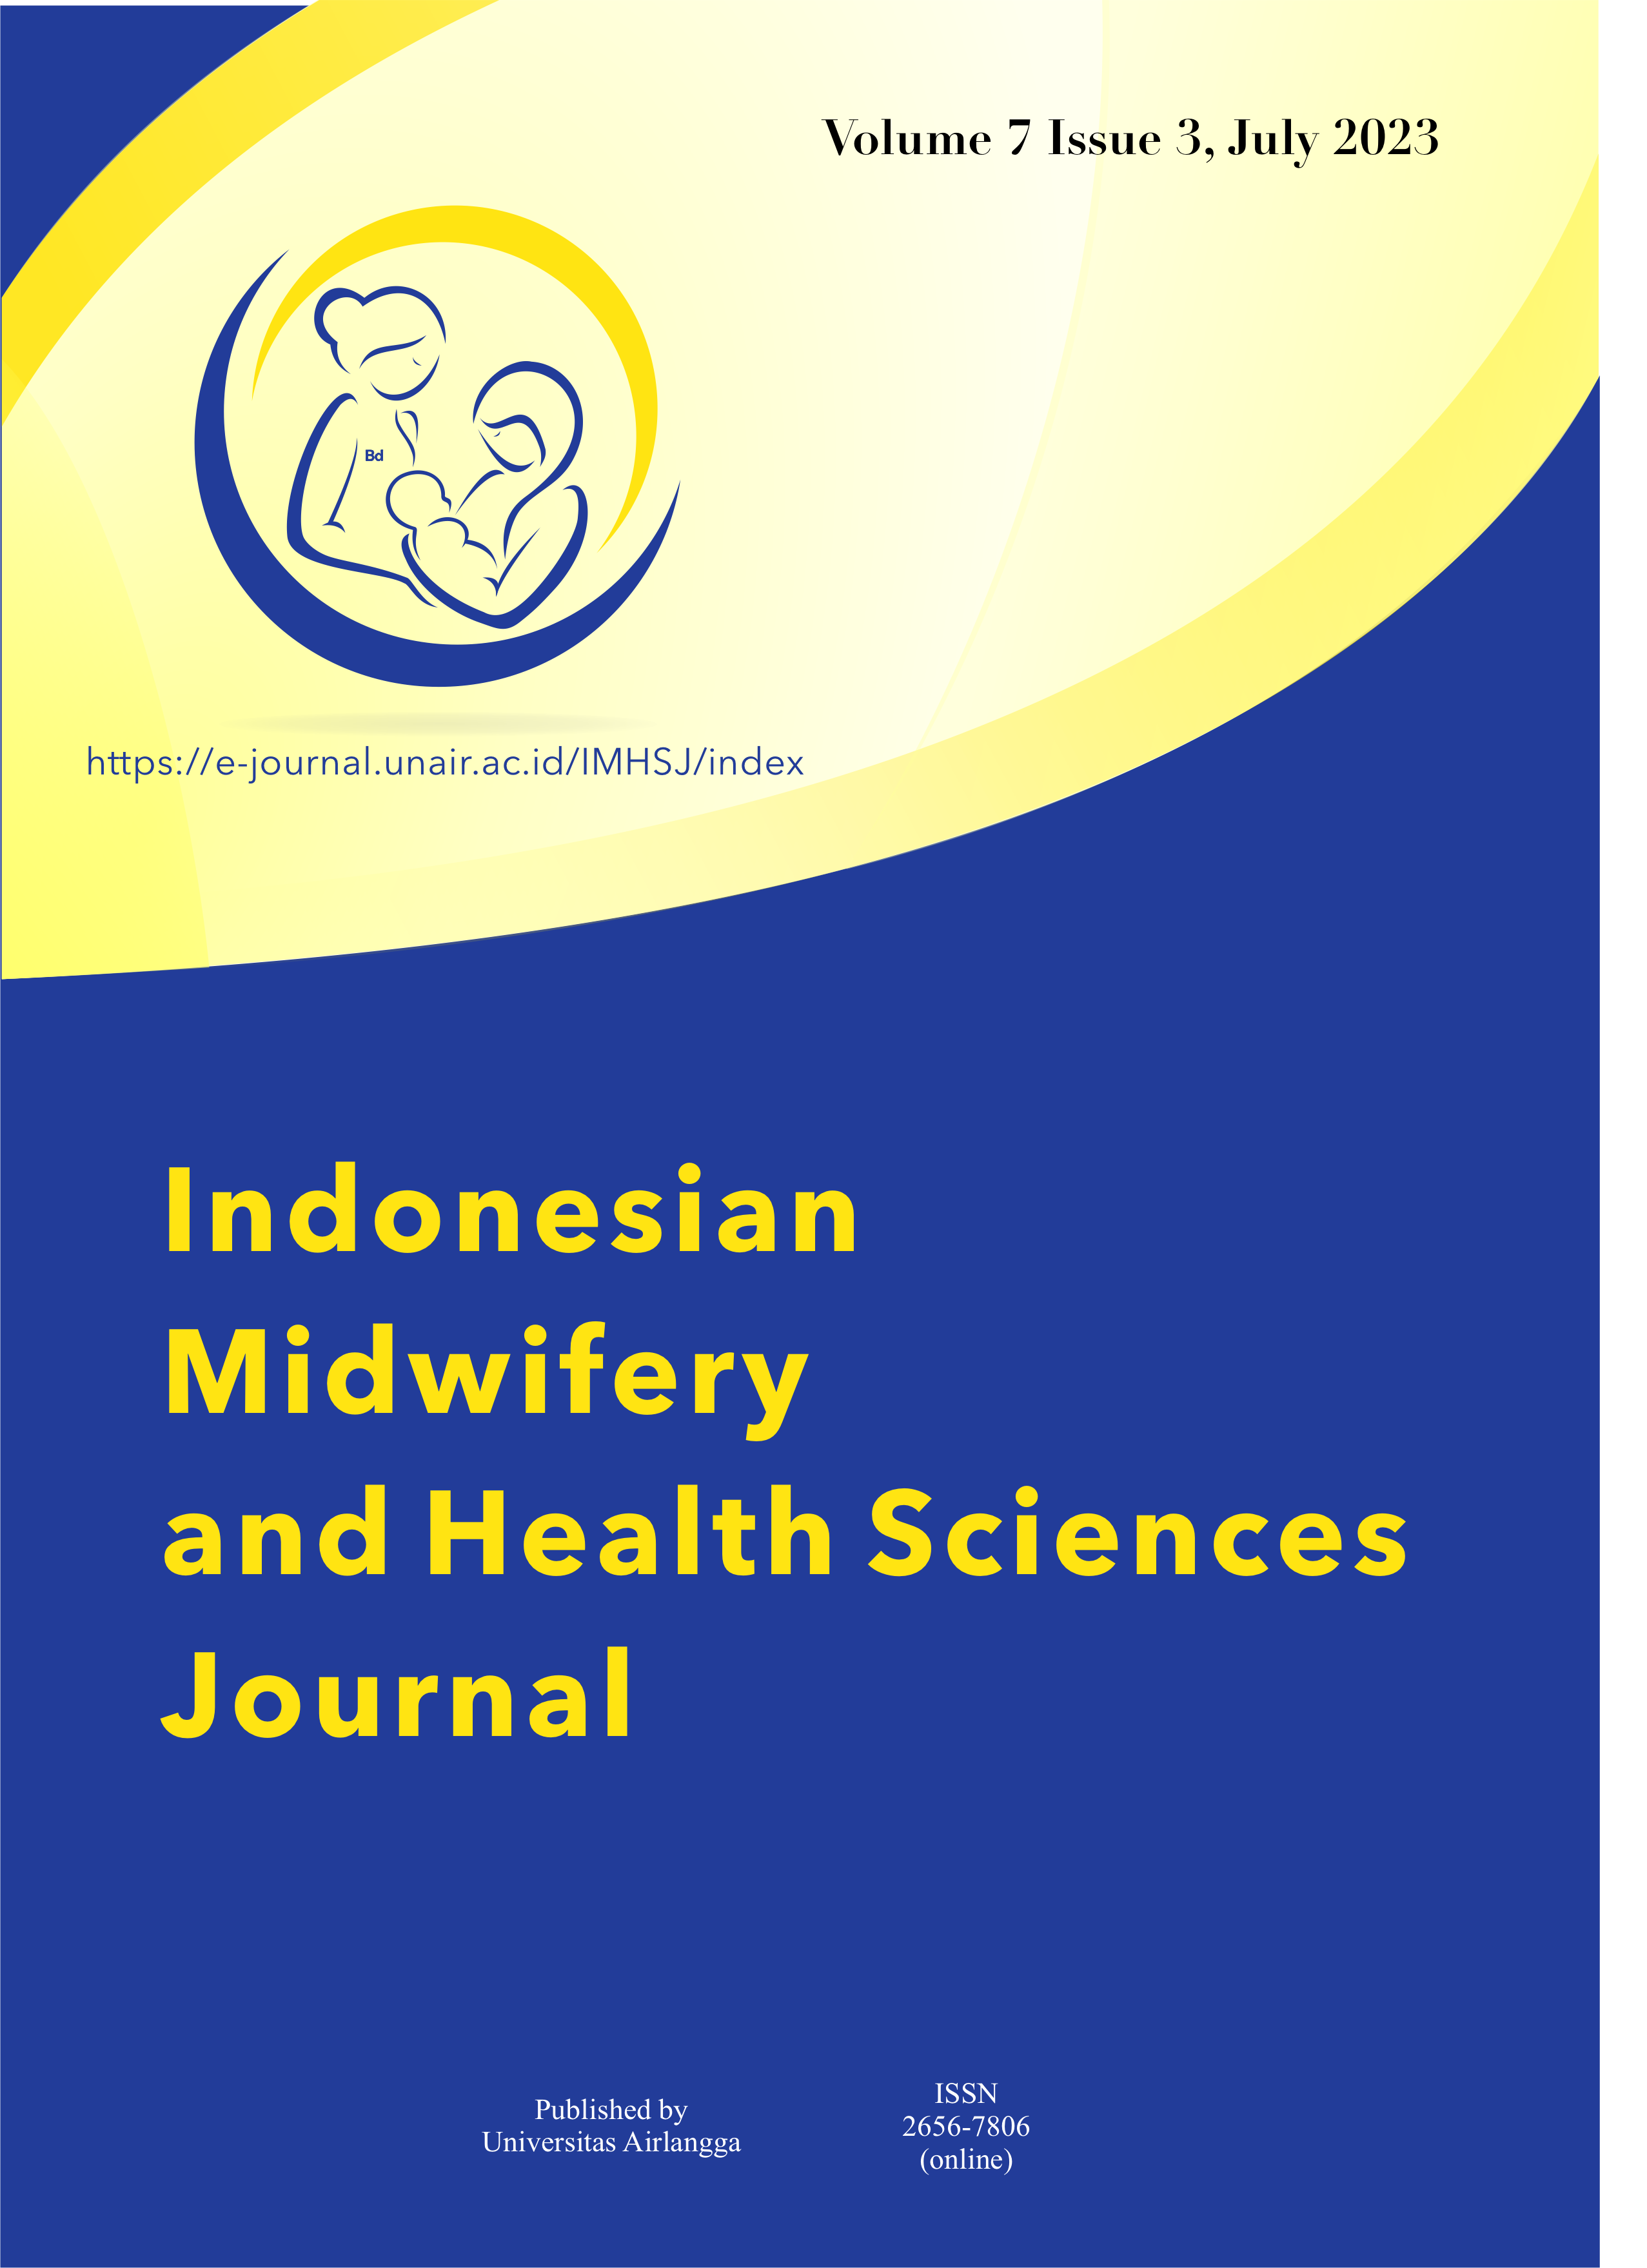 						View Vol. 7 No. 3 (2023): Indonesian Midwifery and Health Sciences Journal, July 2023 
					